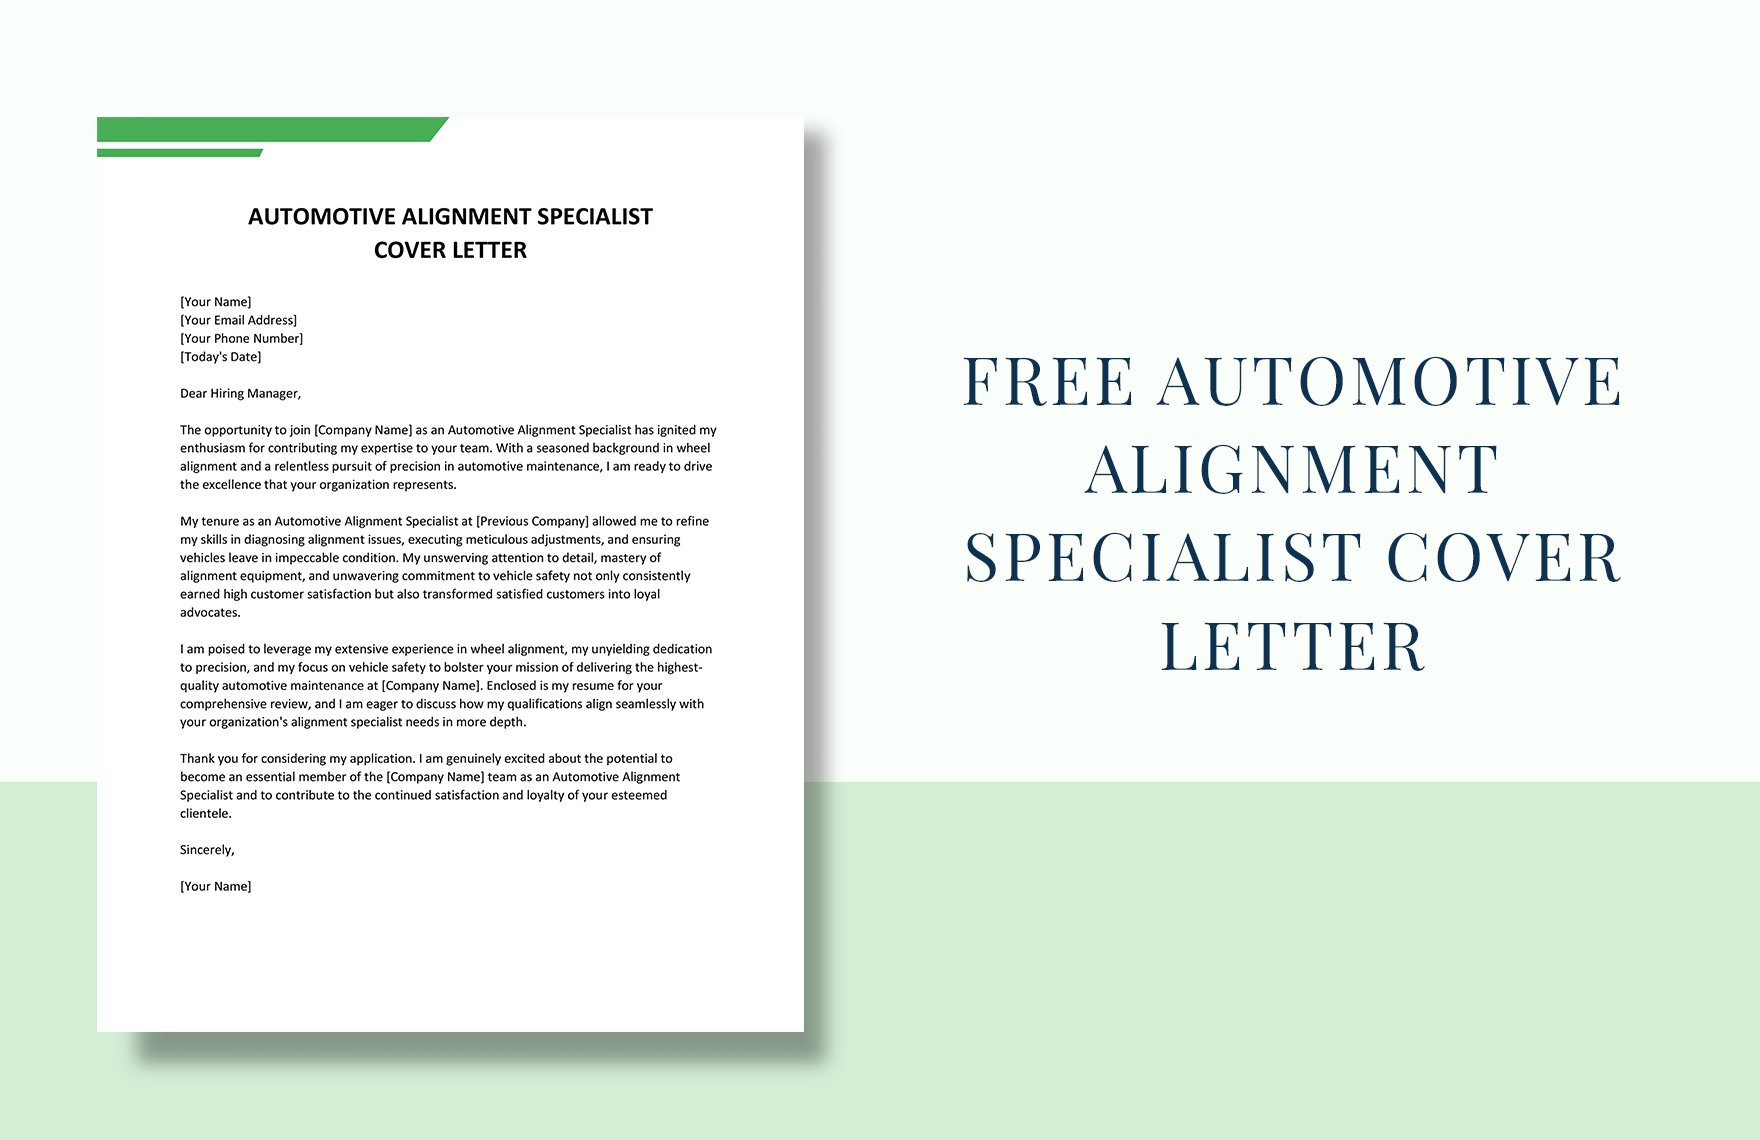 Automotive Alignment Specialist Cover Letter